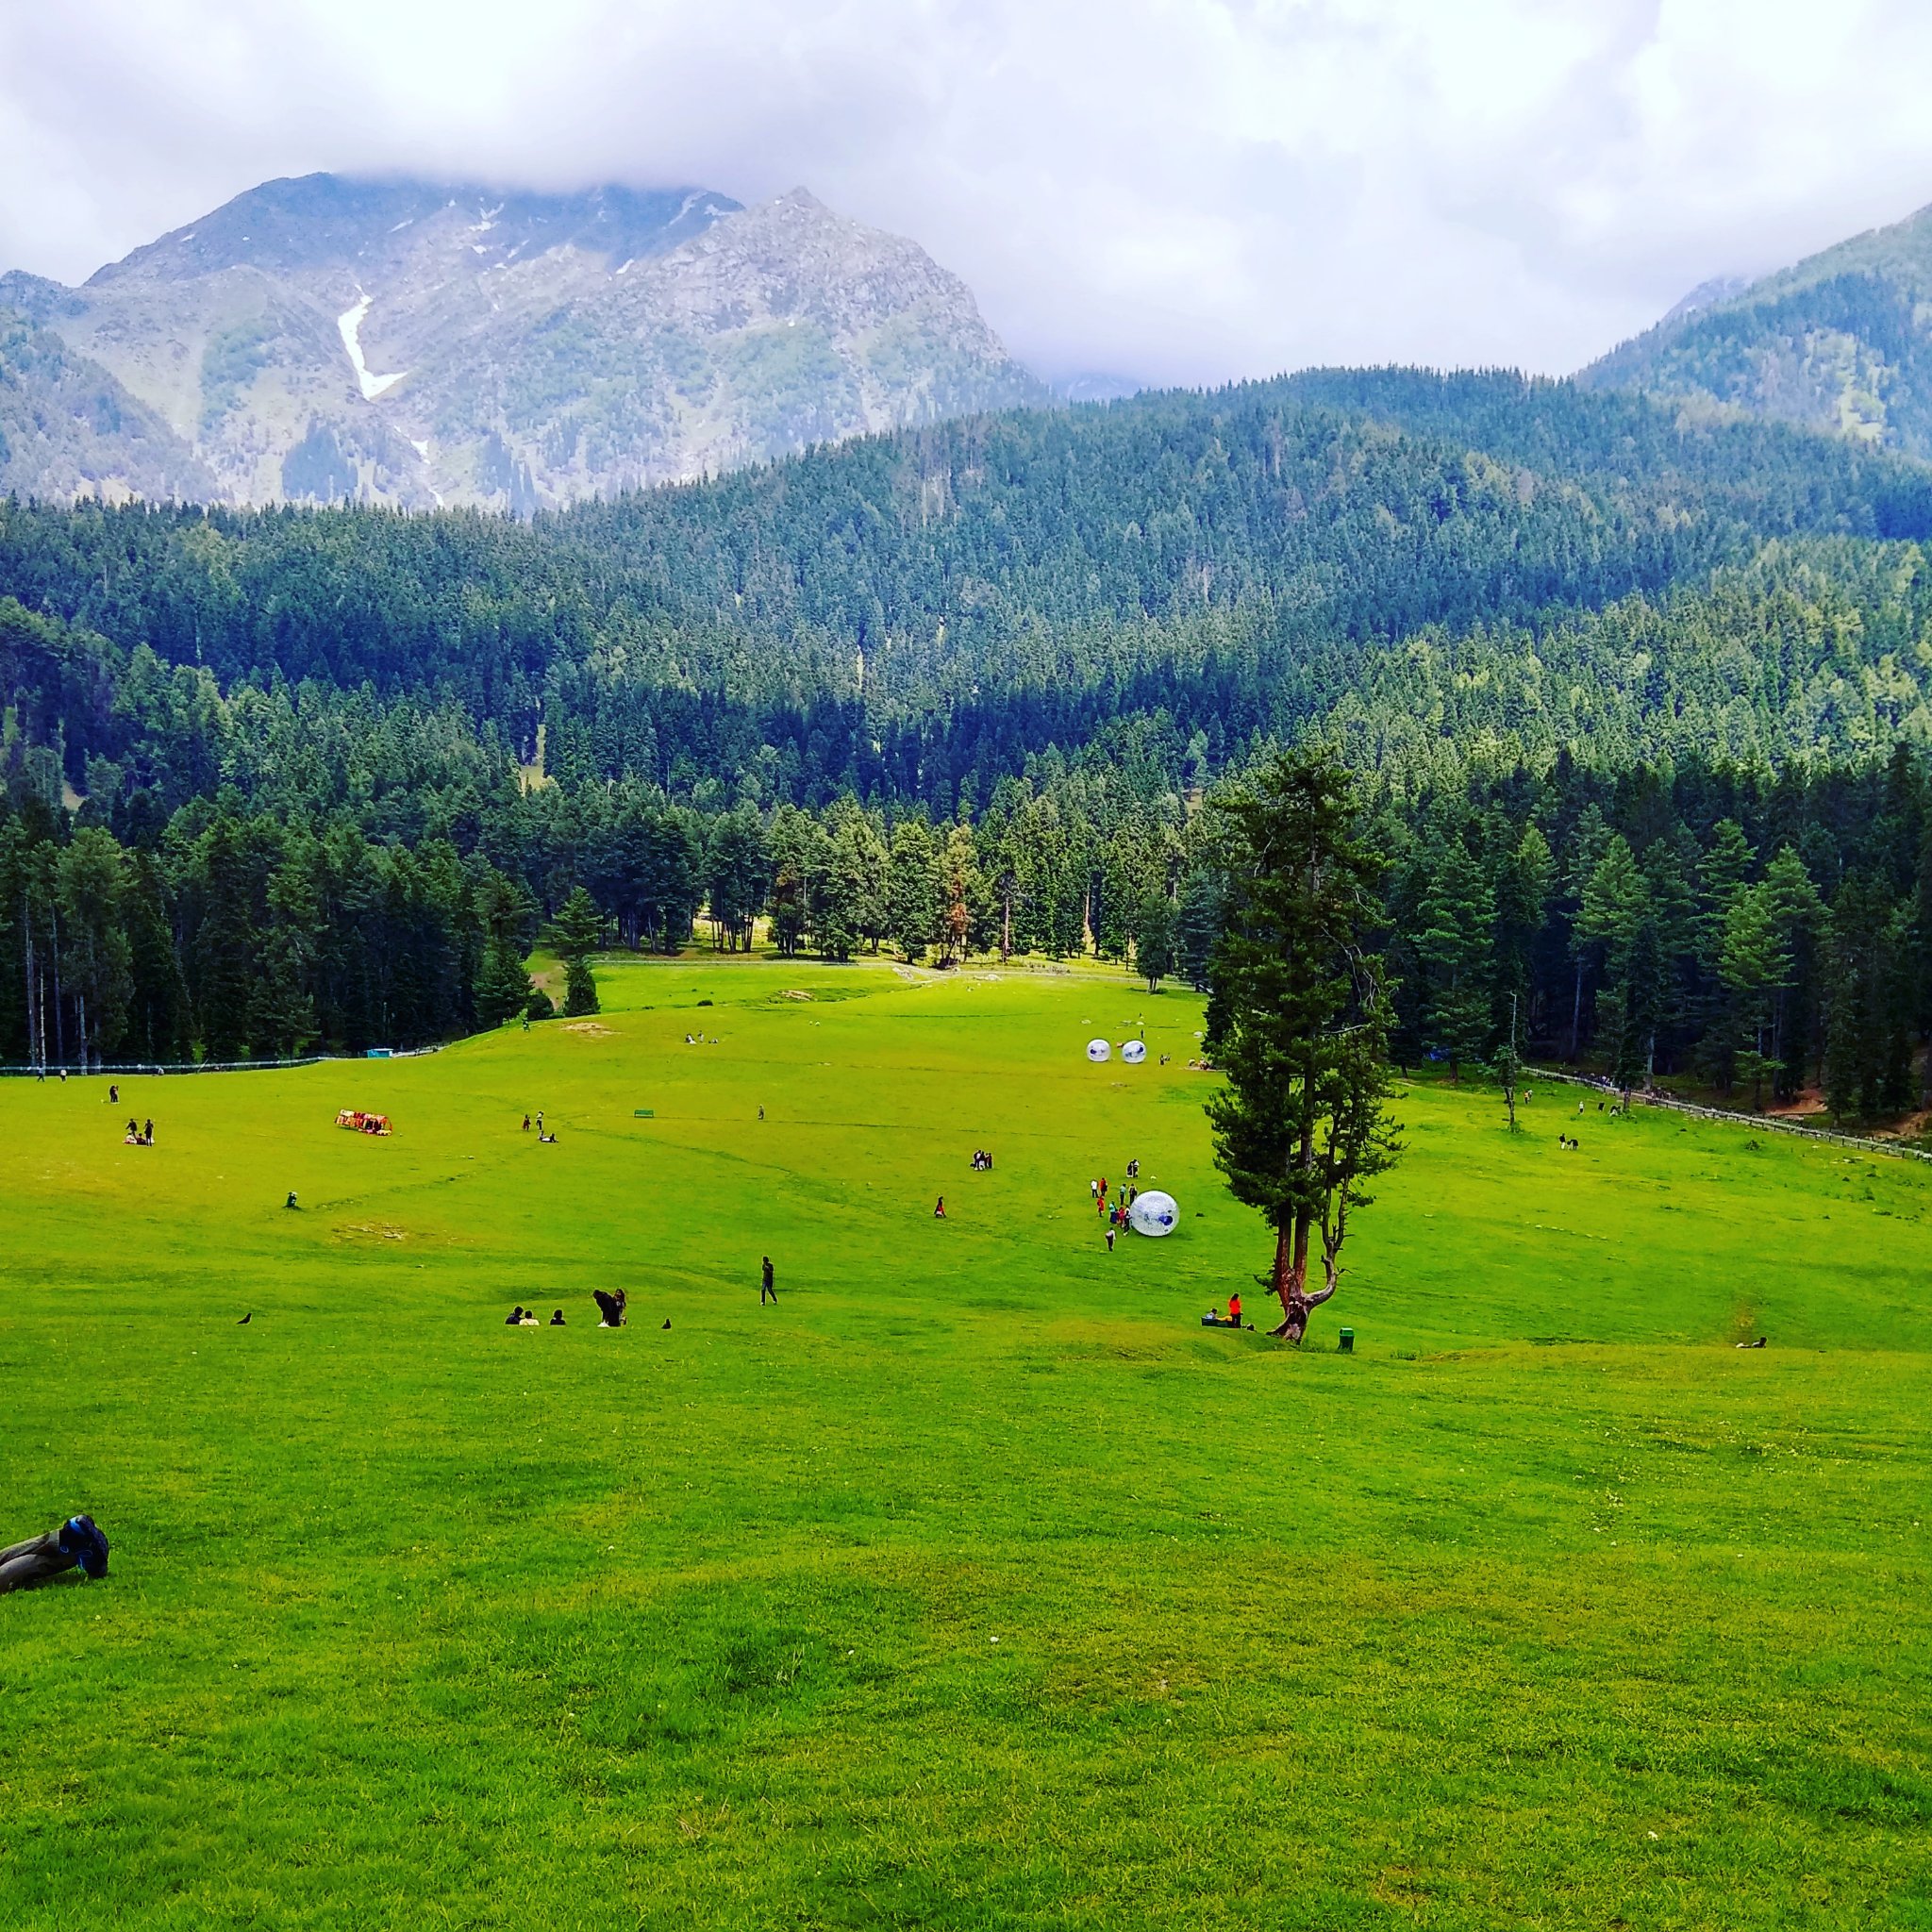 manali tour & travel packages